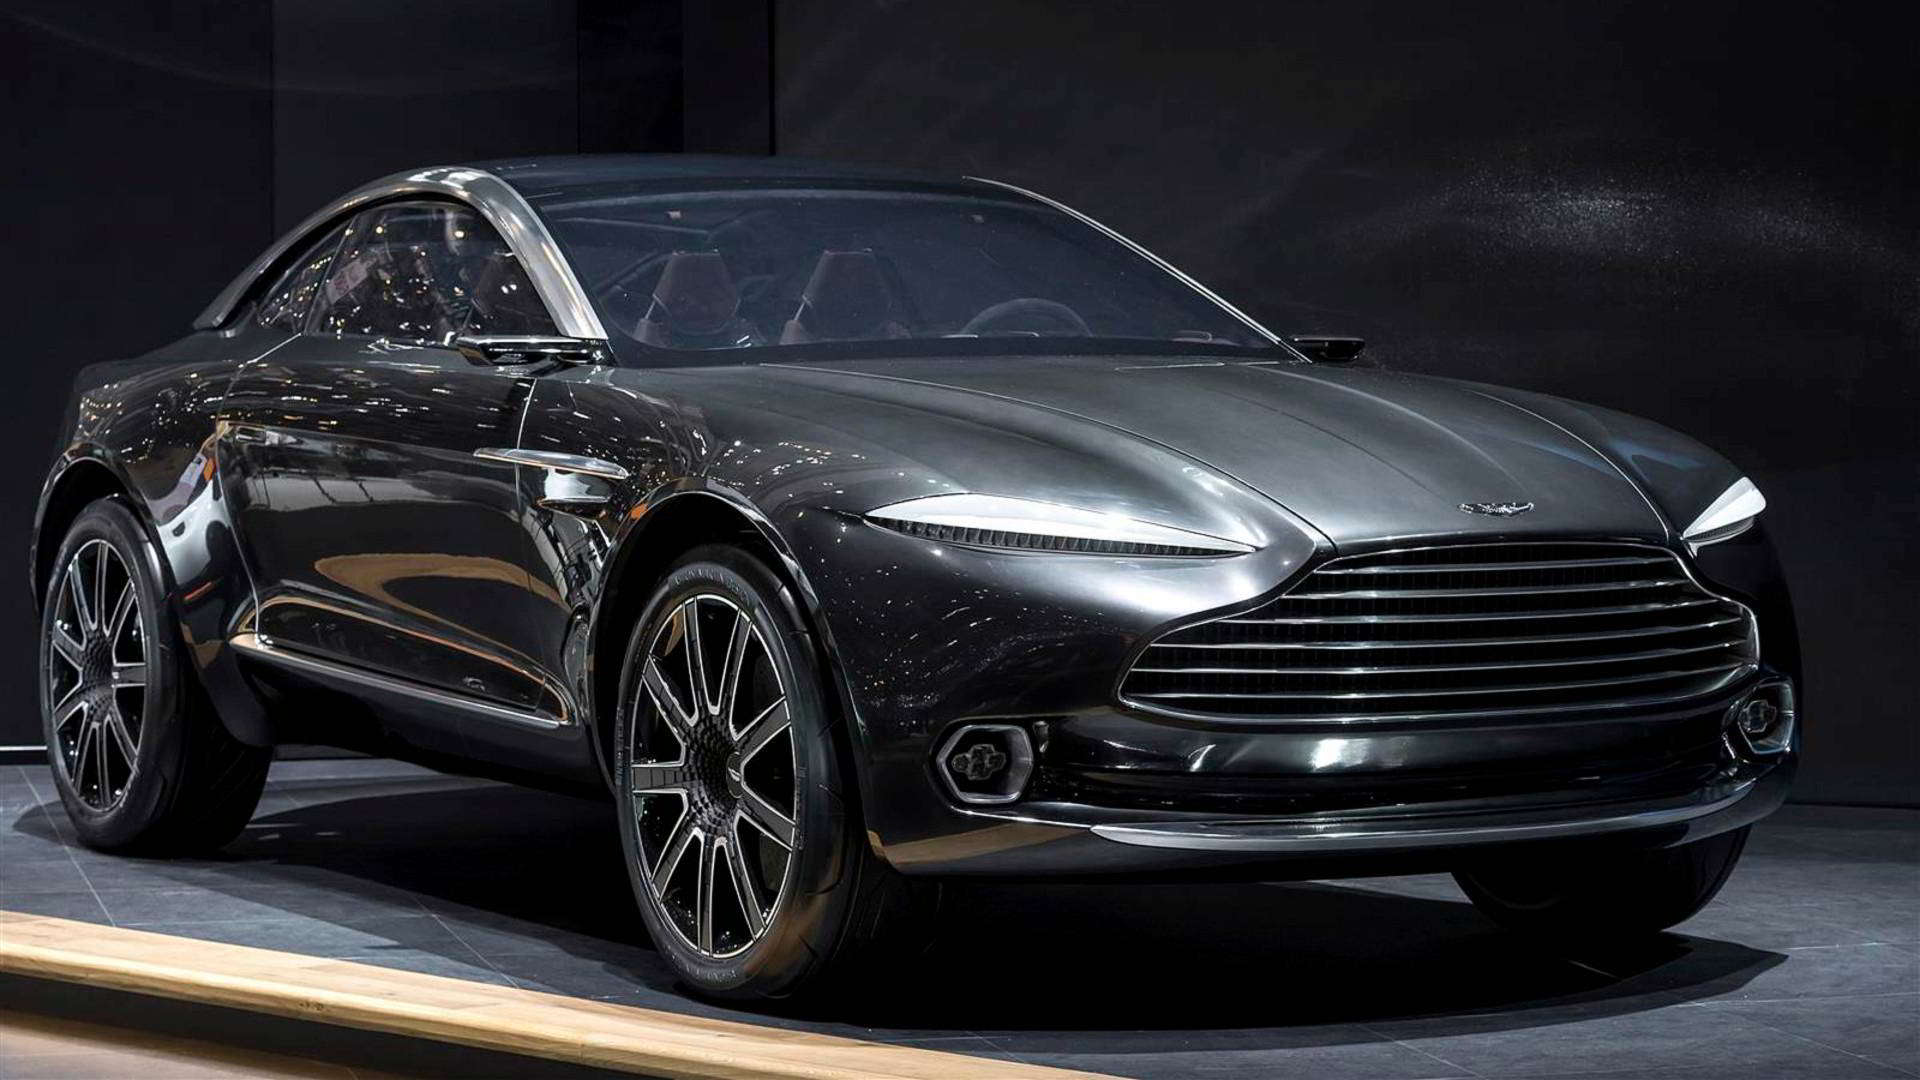 The Best Aston Martin Dbx Res Cars Concept